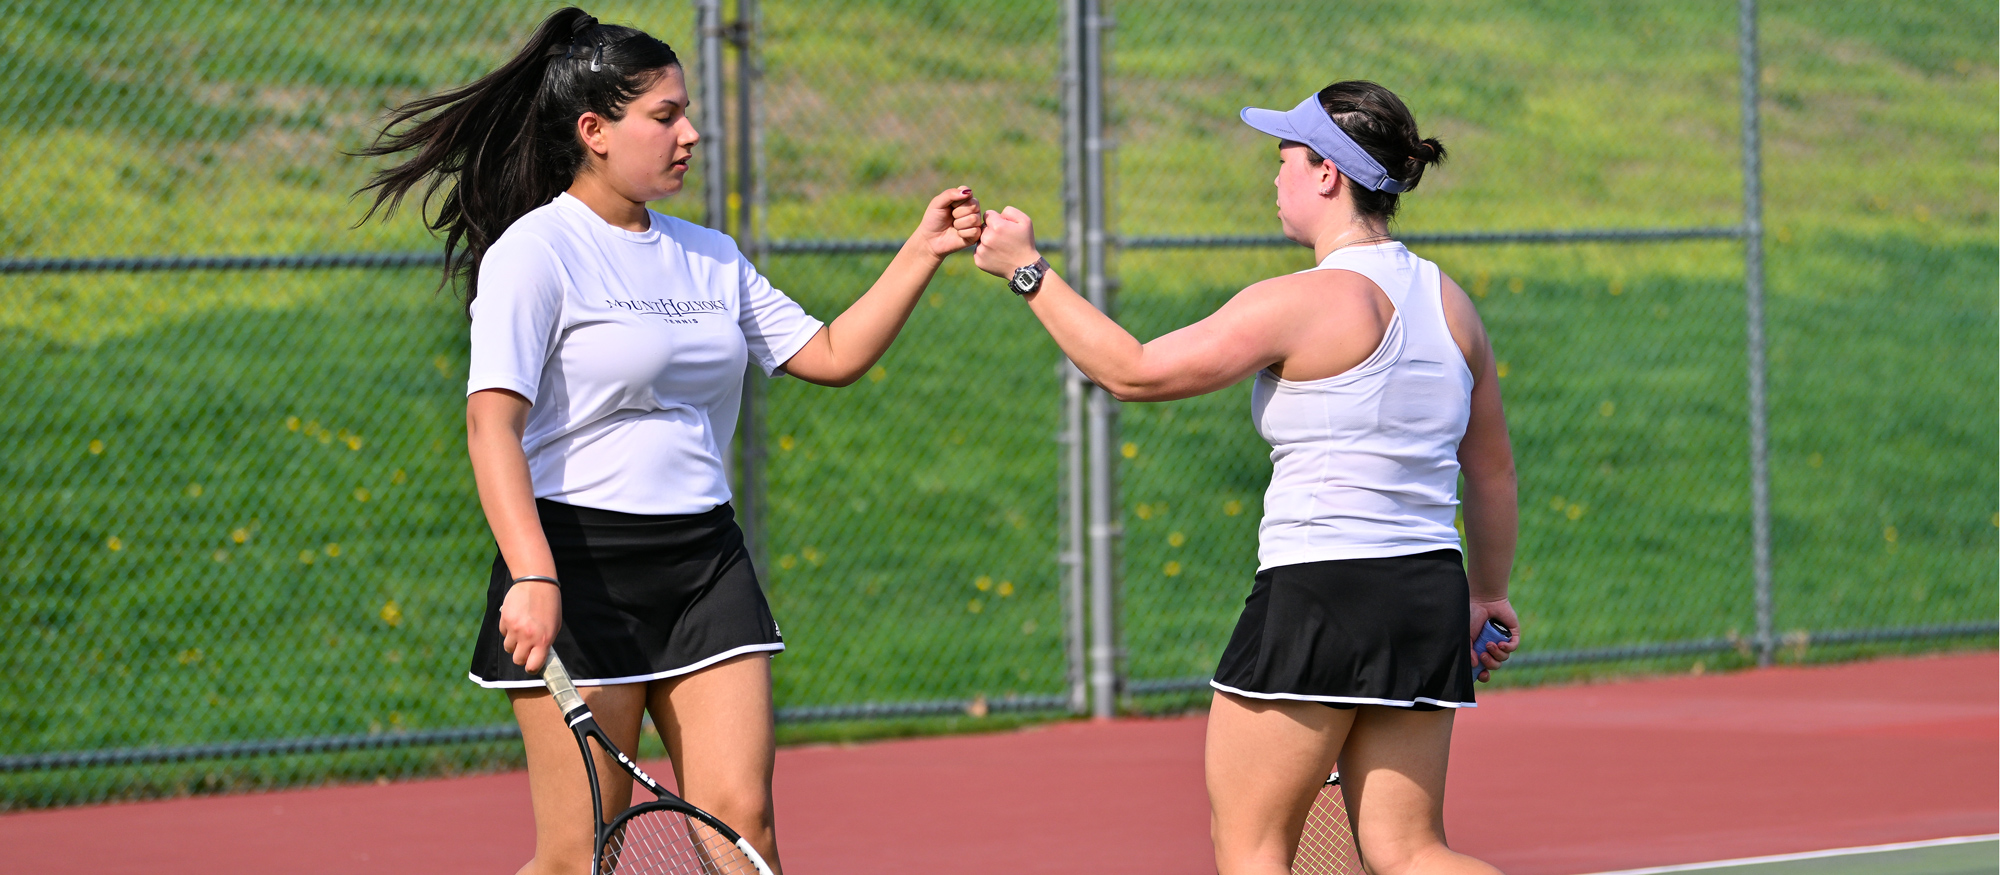 Jaskirat Kaur (left) and Annika Chai (right) combined to go 3-3 in A Singles and Doubles competition at the ITA Regional Championships at Wesleyan University on Sept. 22, 2023. (RJB Sports file photo)